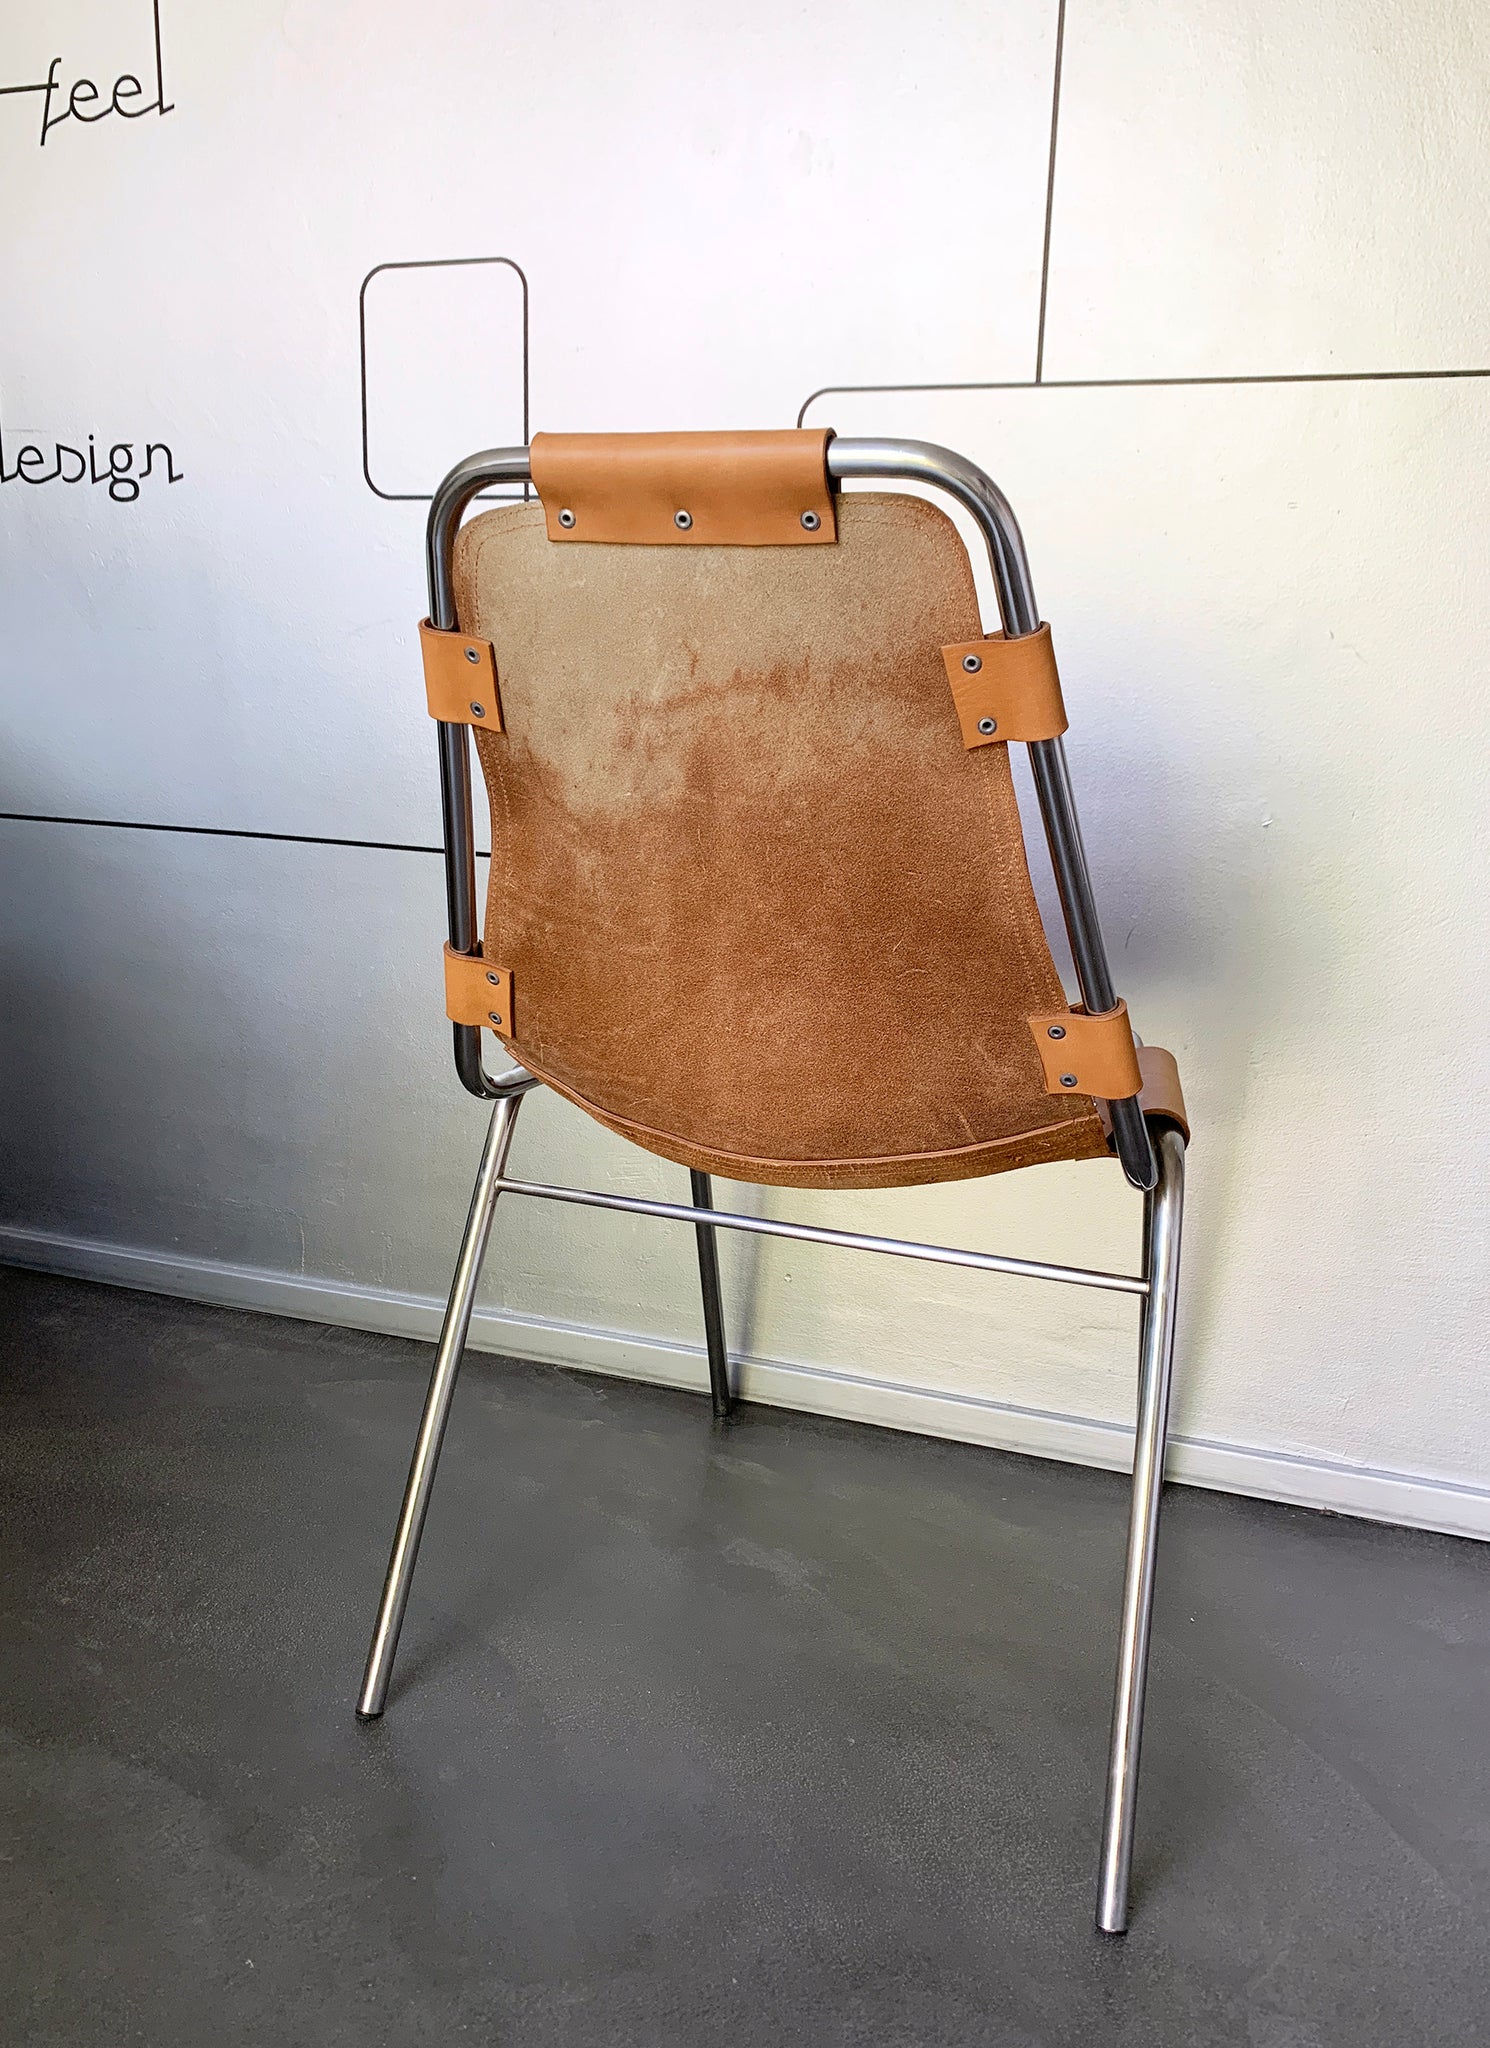 Les Arcs Chairs by Charlotte Perriand – Modern Resale